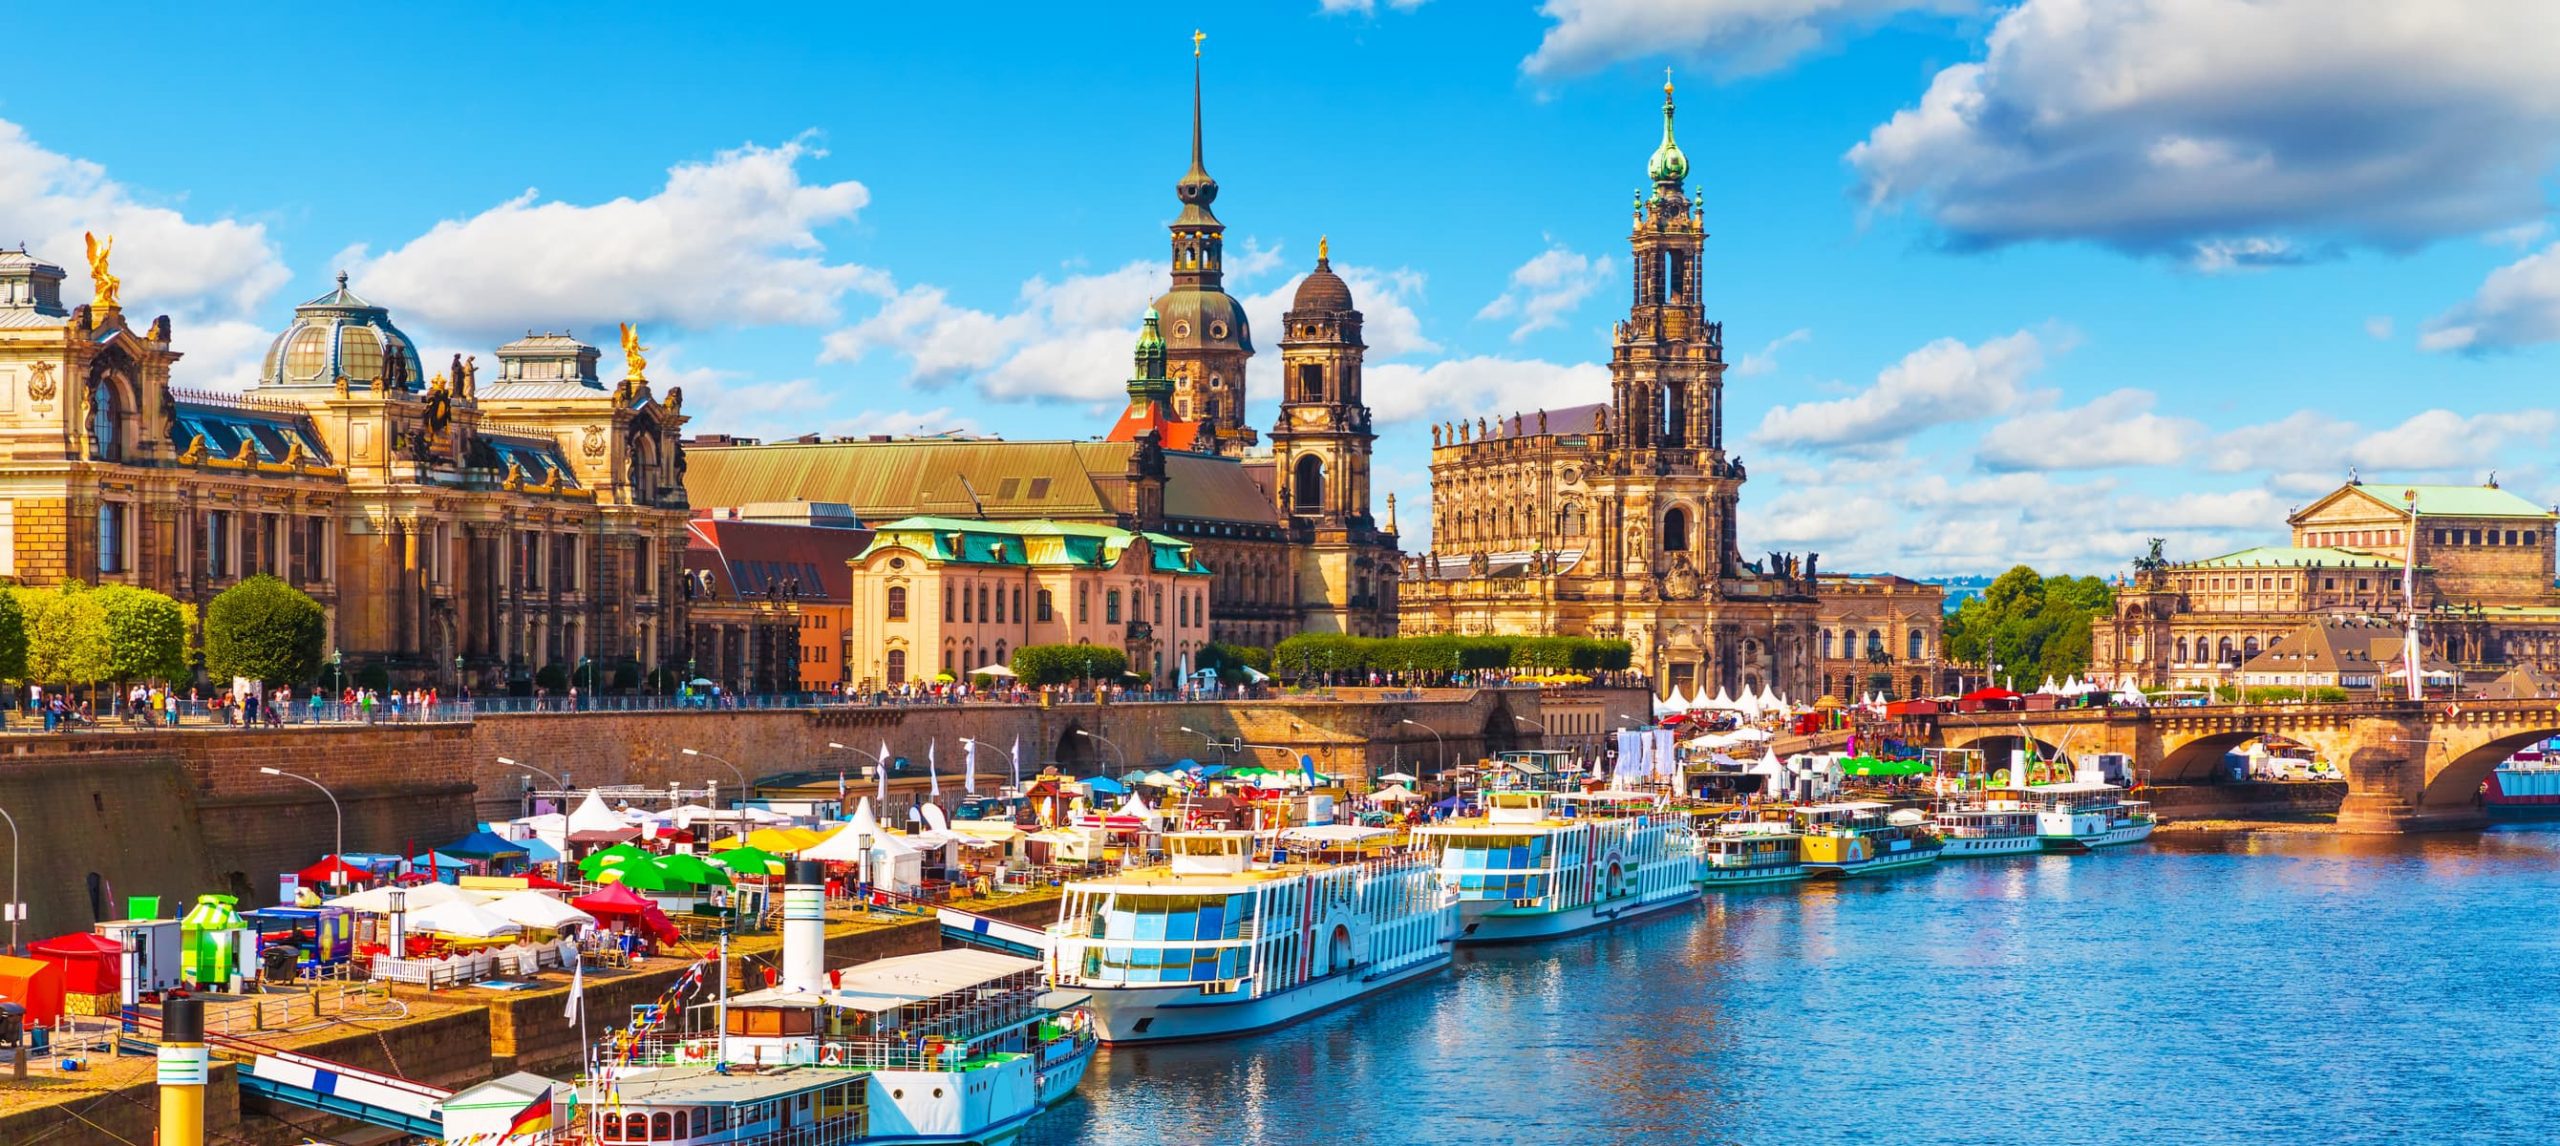 The Best Hotels In Dresden, Germany